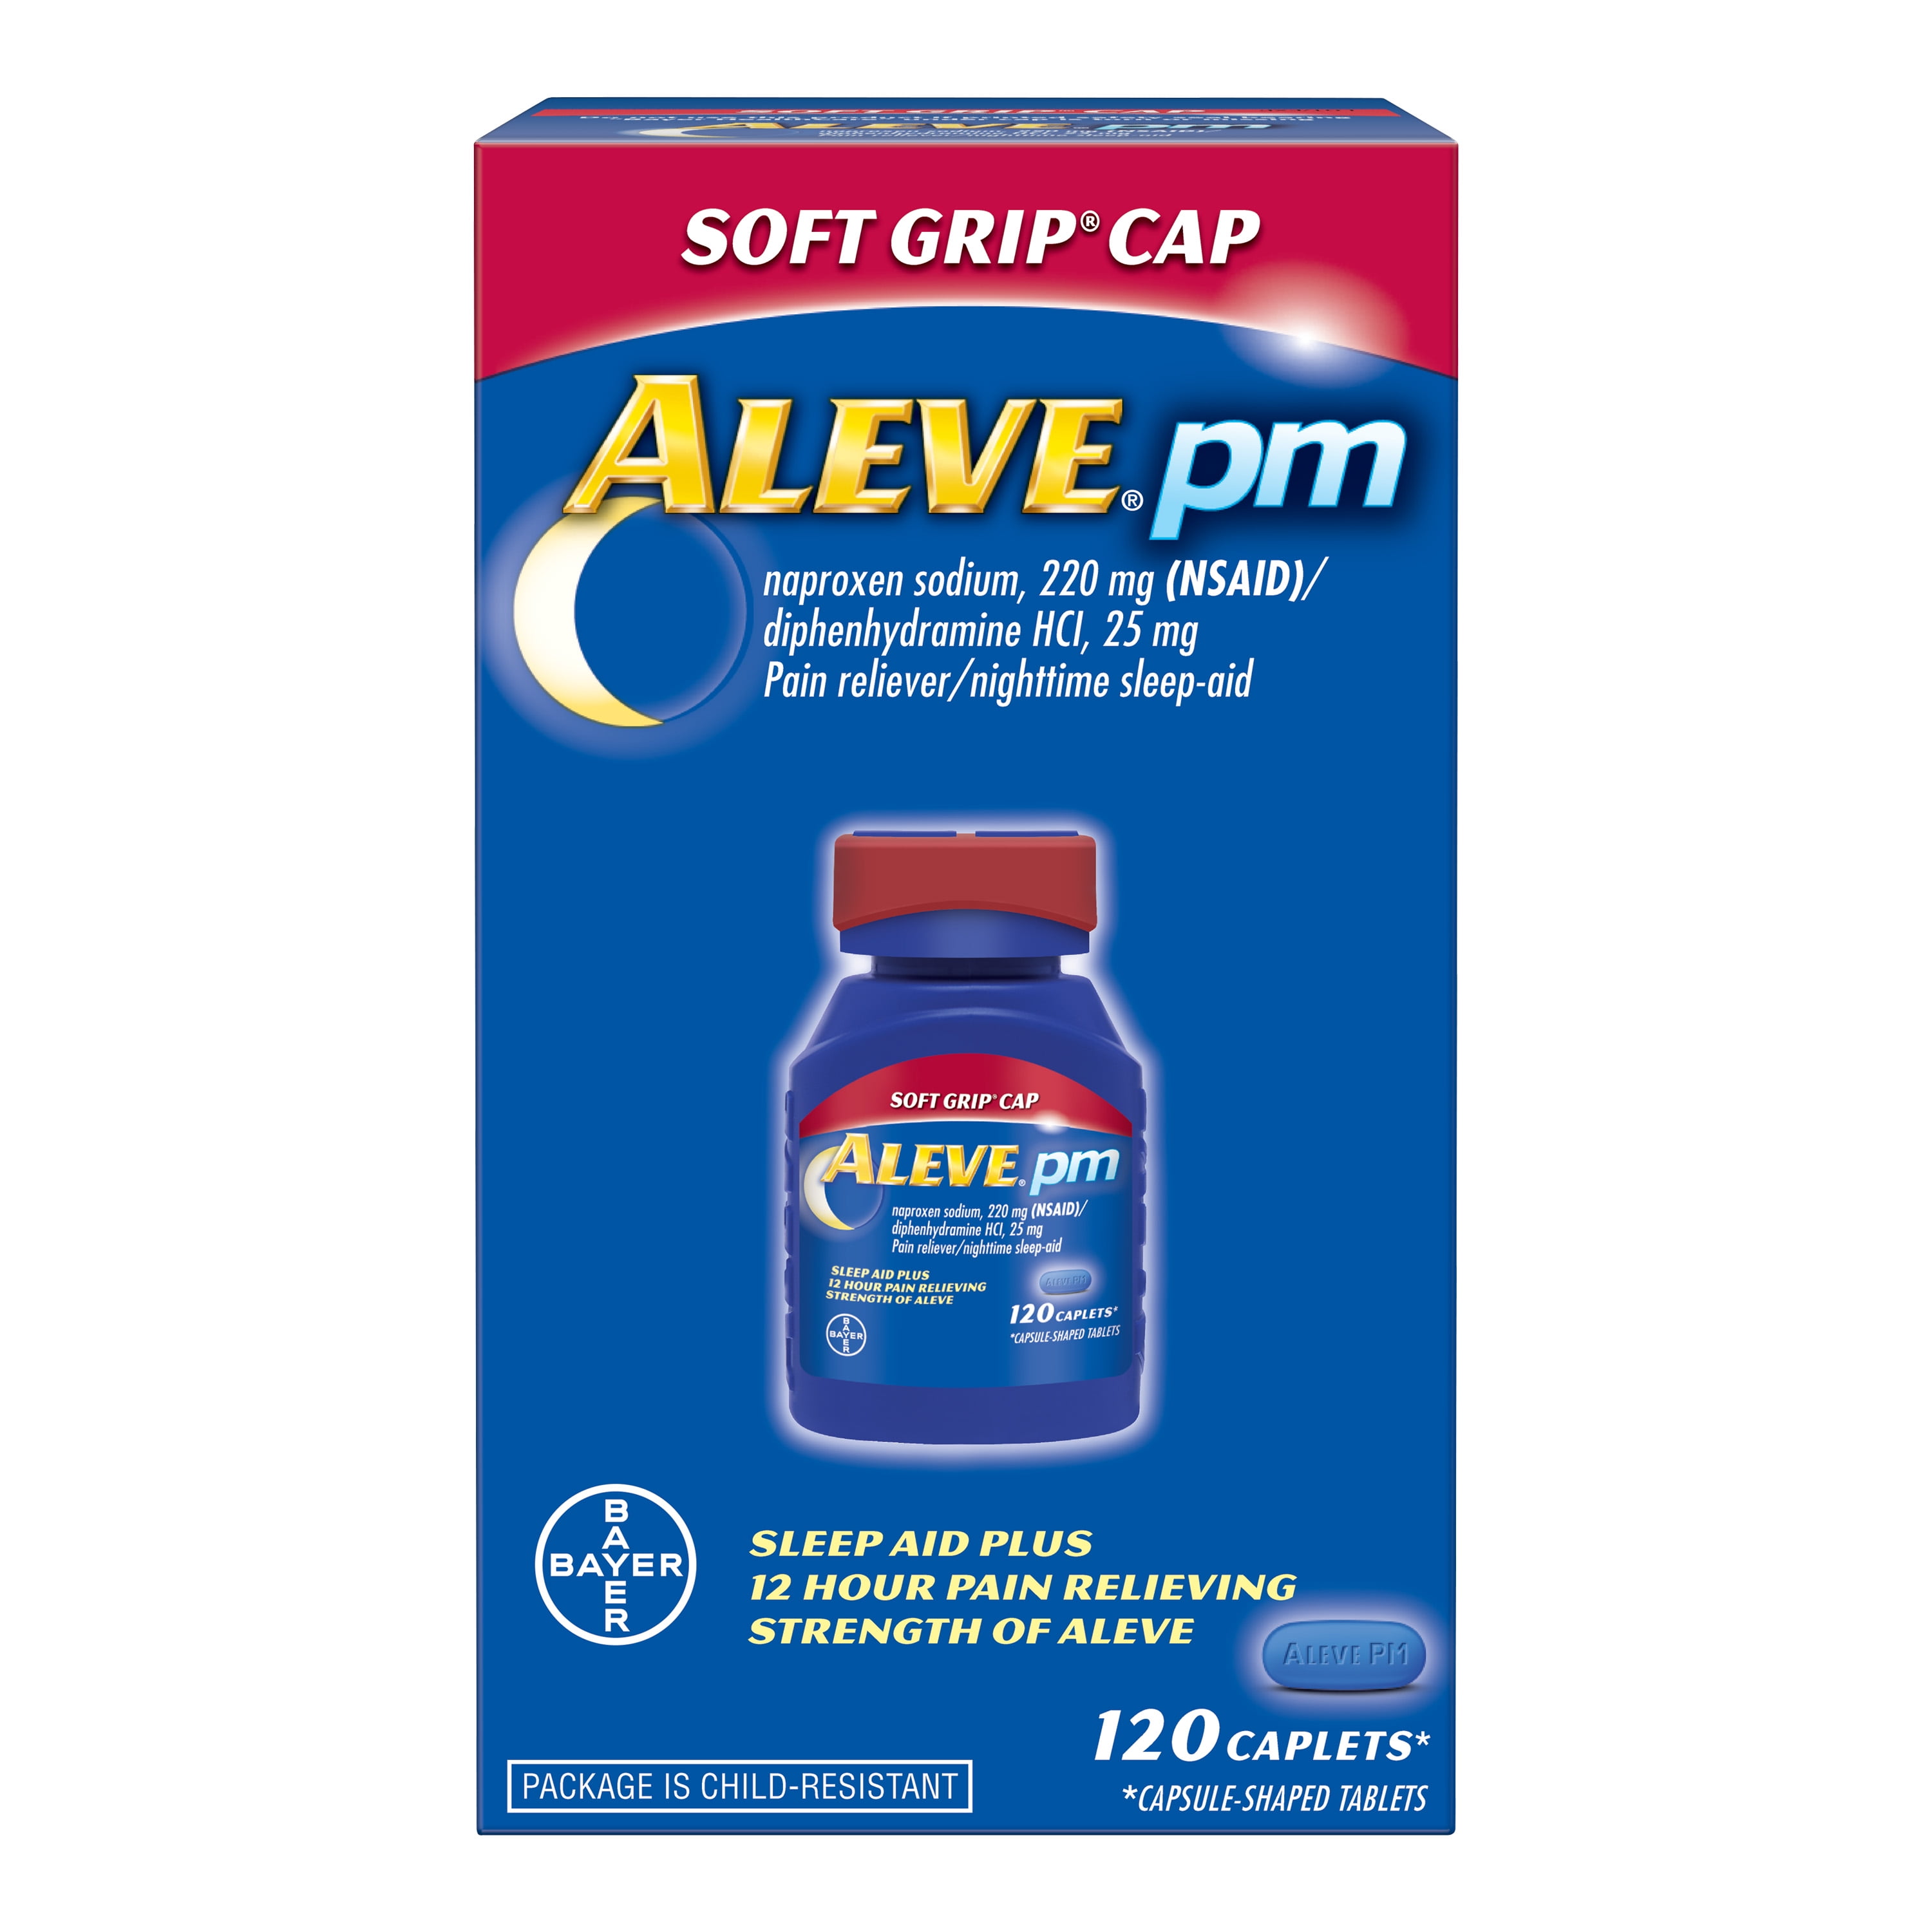 Powerful 12-Hour Pain Relief with Aleve® (naproxen sodium) Soft Grip®